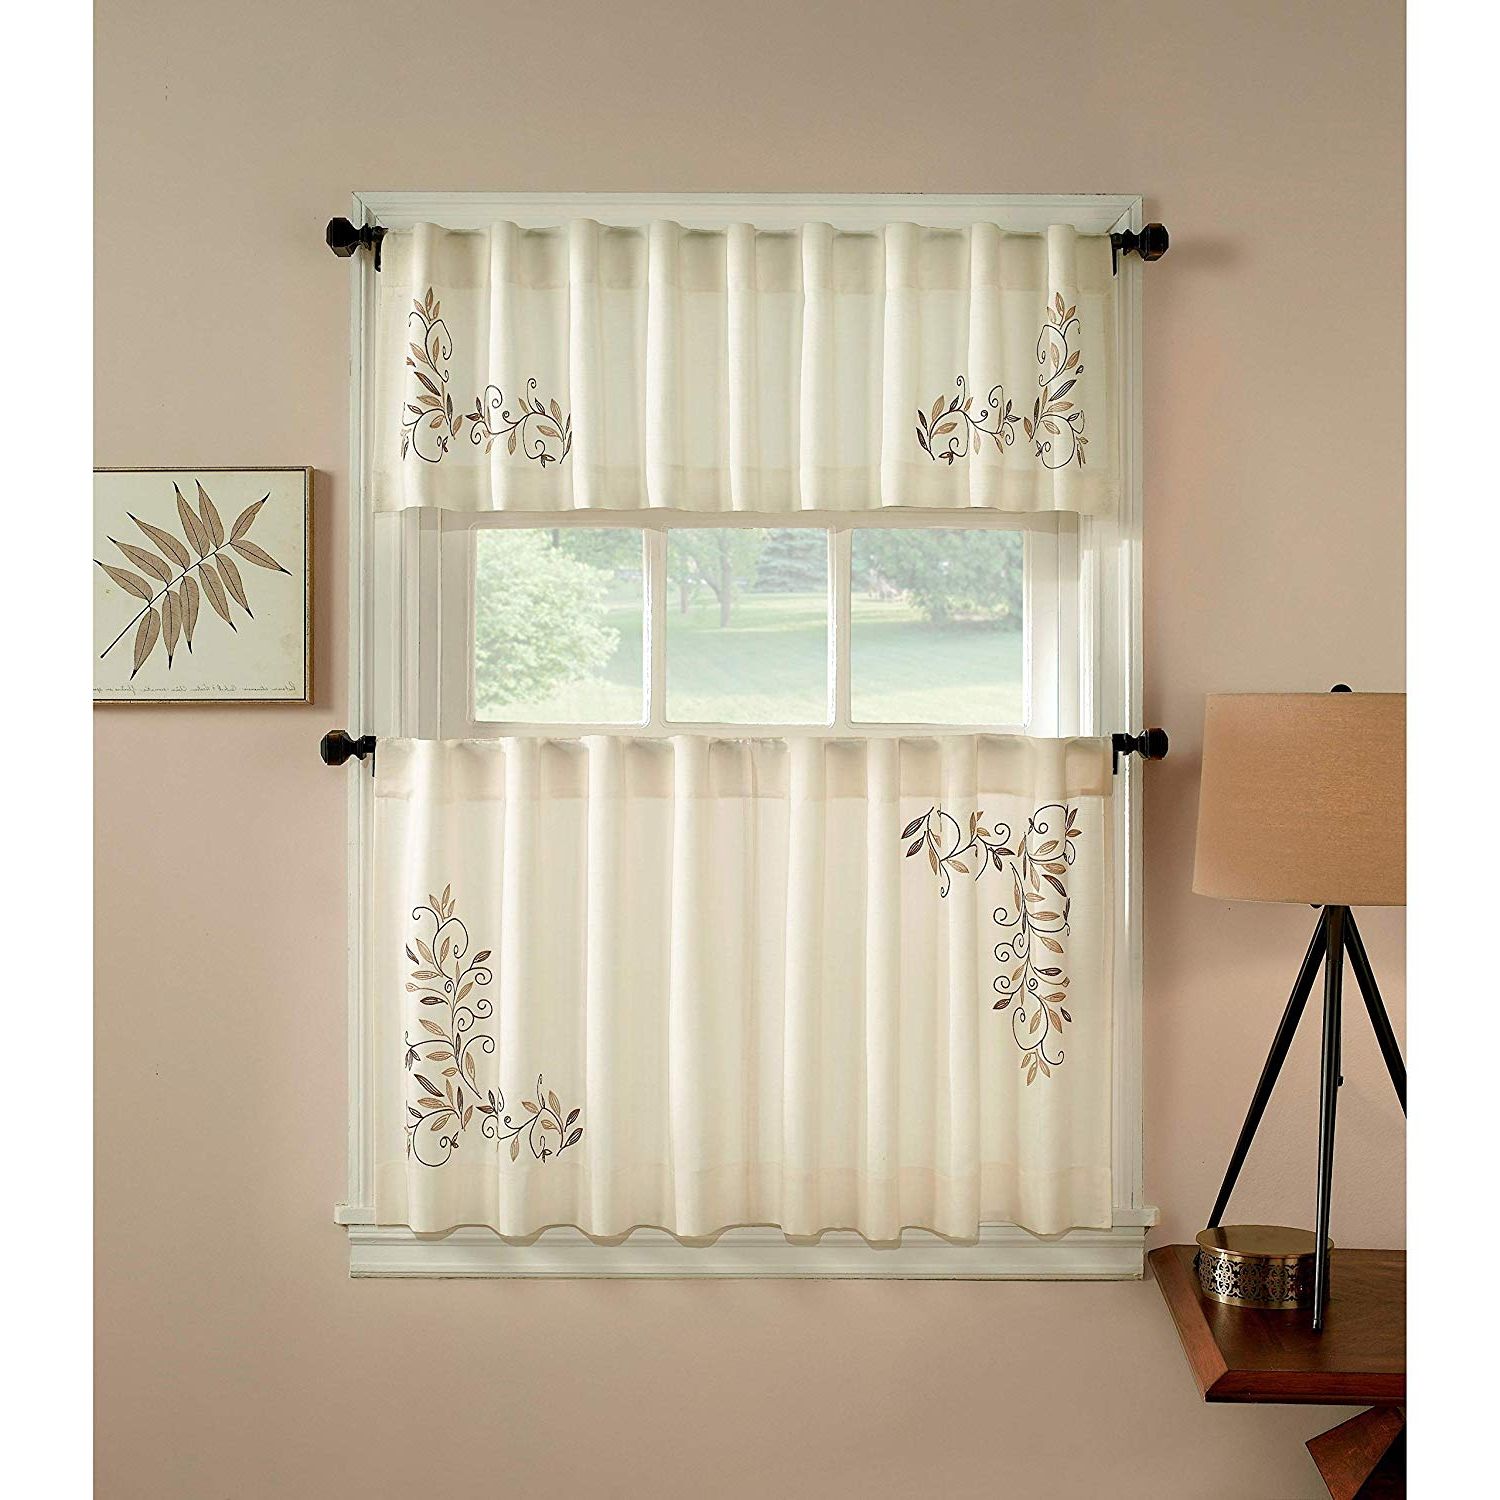 Scroll Leaf 3 Piece Curtain Tier And Valance Sets In 2021 Amazon: Chf Industries Scroll Leaf 3 Piece Curtain Tier (View 1 of 20)